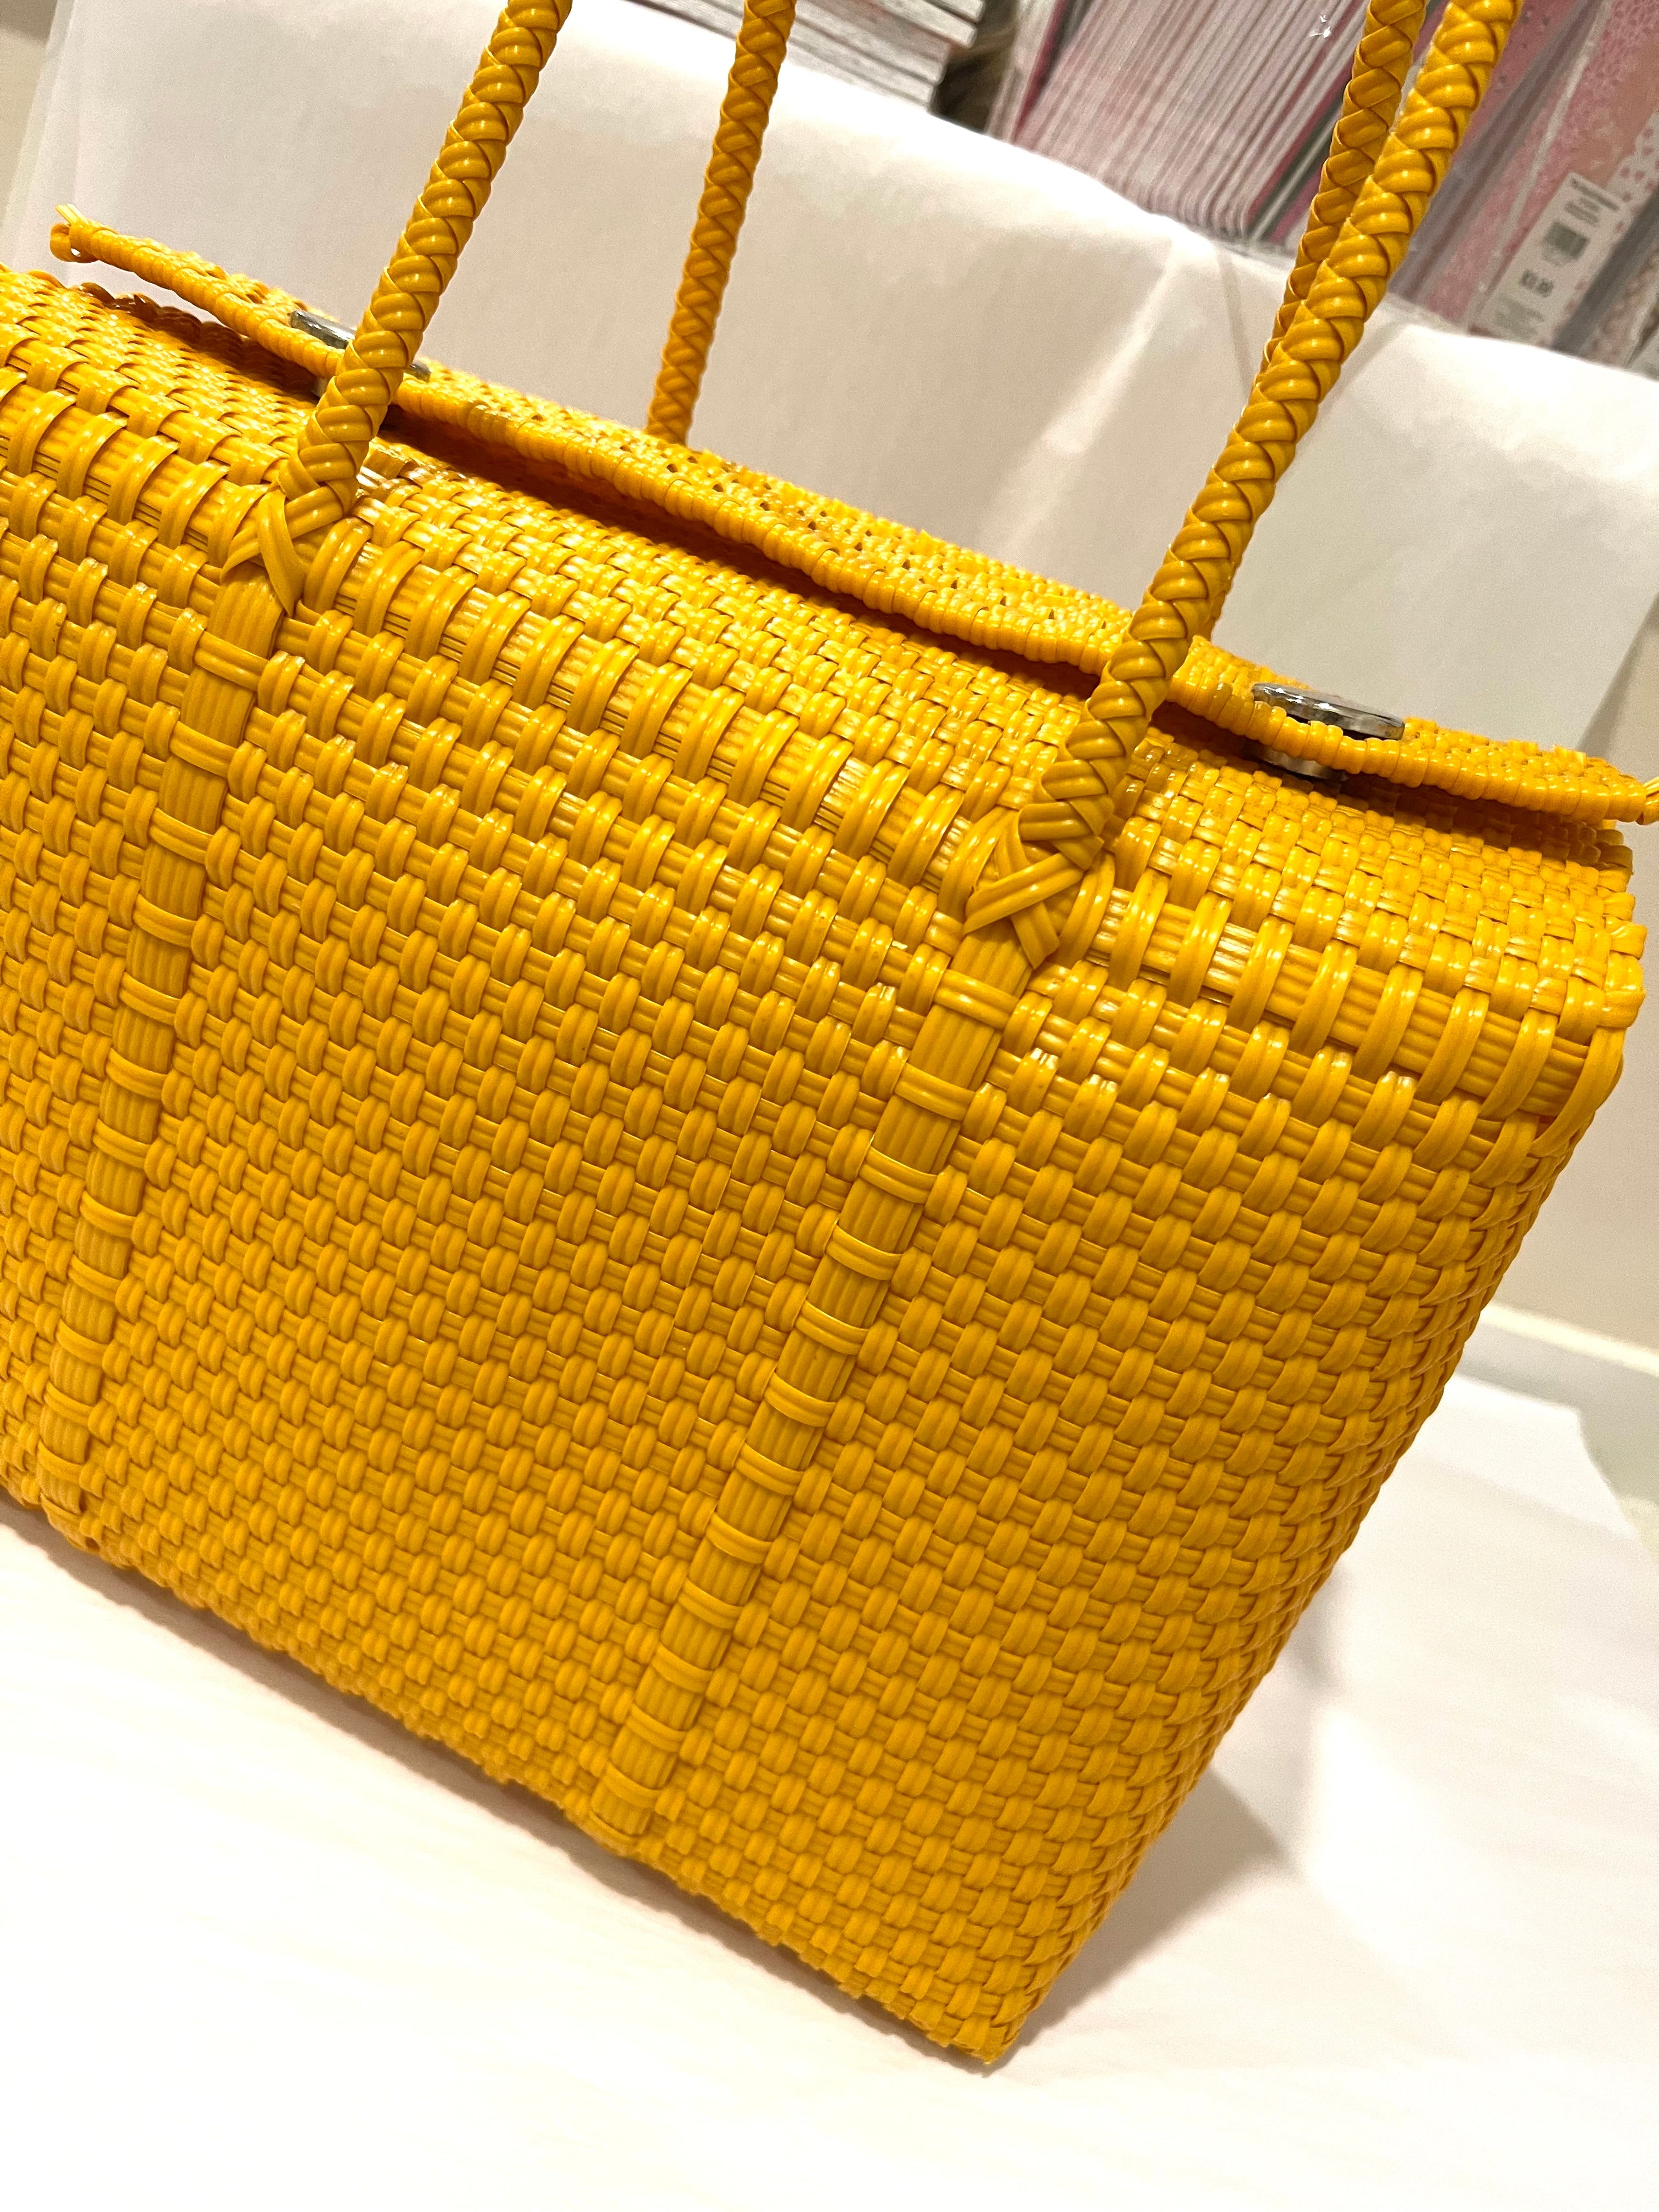 Ladies Hollow Straw Bag Golden Silvery Wire Checkered Women Tote